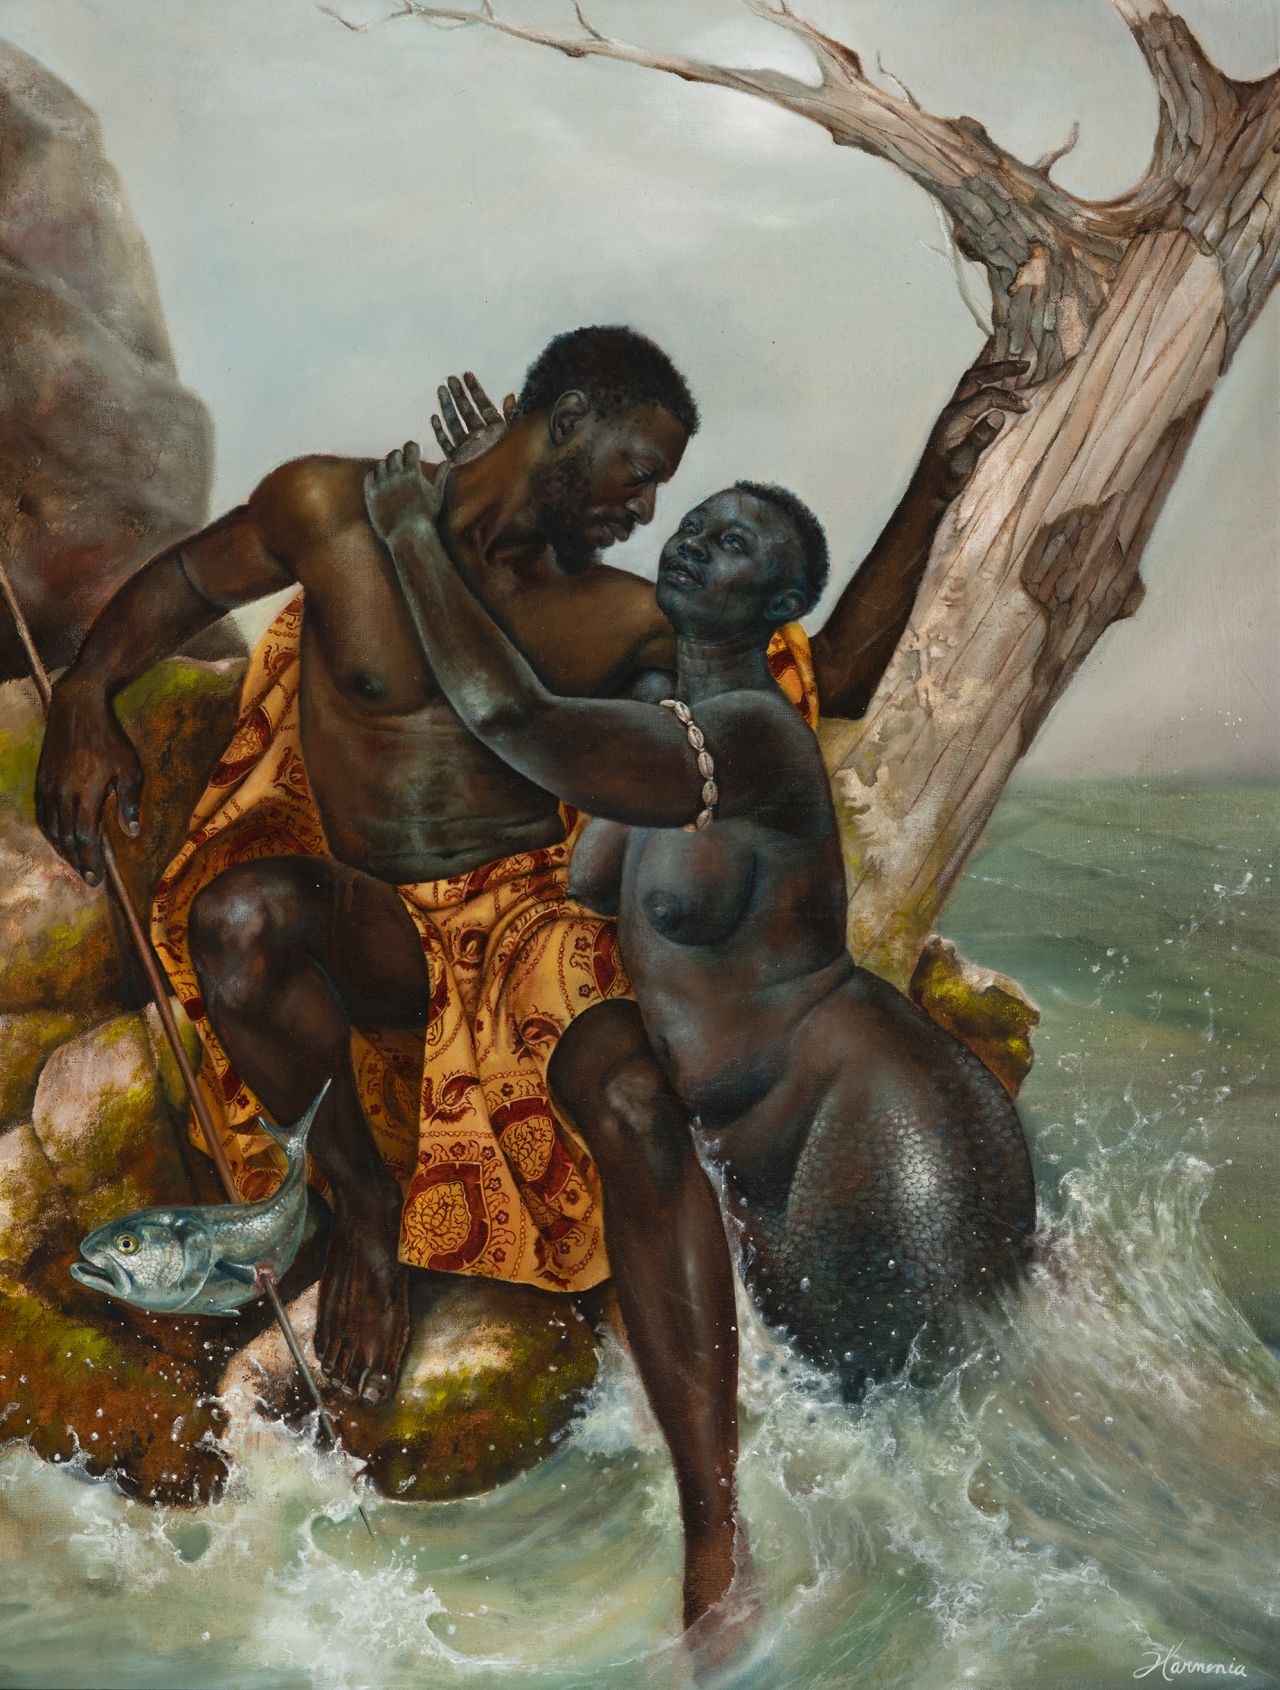 Though Rosales portrays slavery, her paintings also capture the multidimensionality that Black people possess — as in 